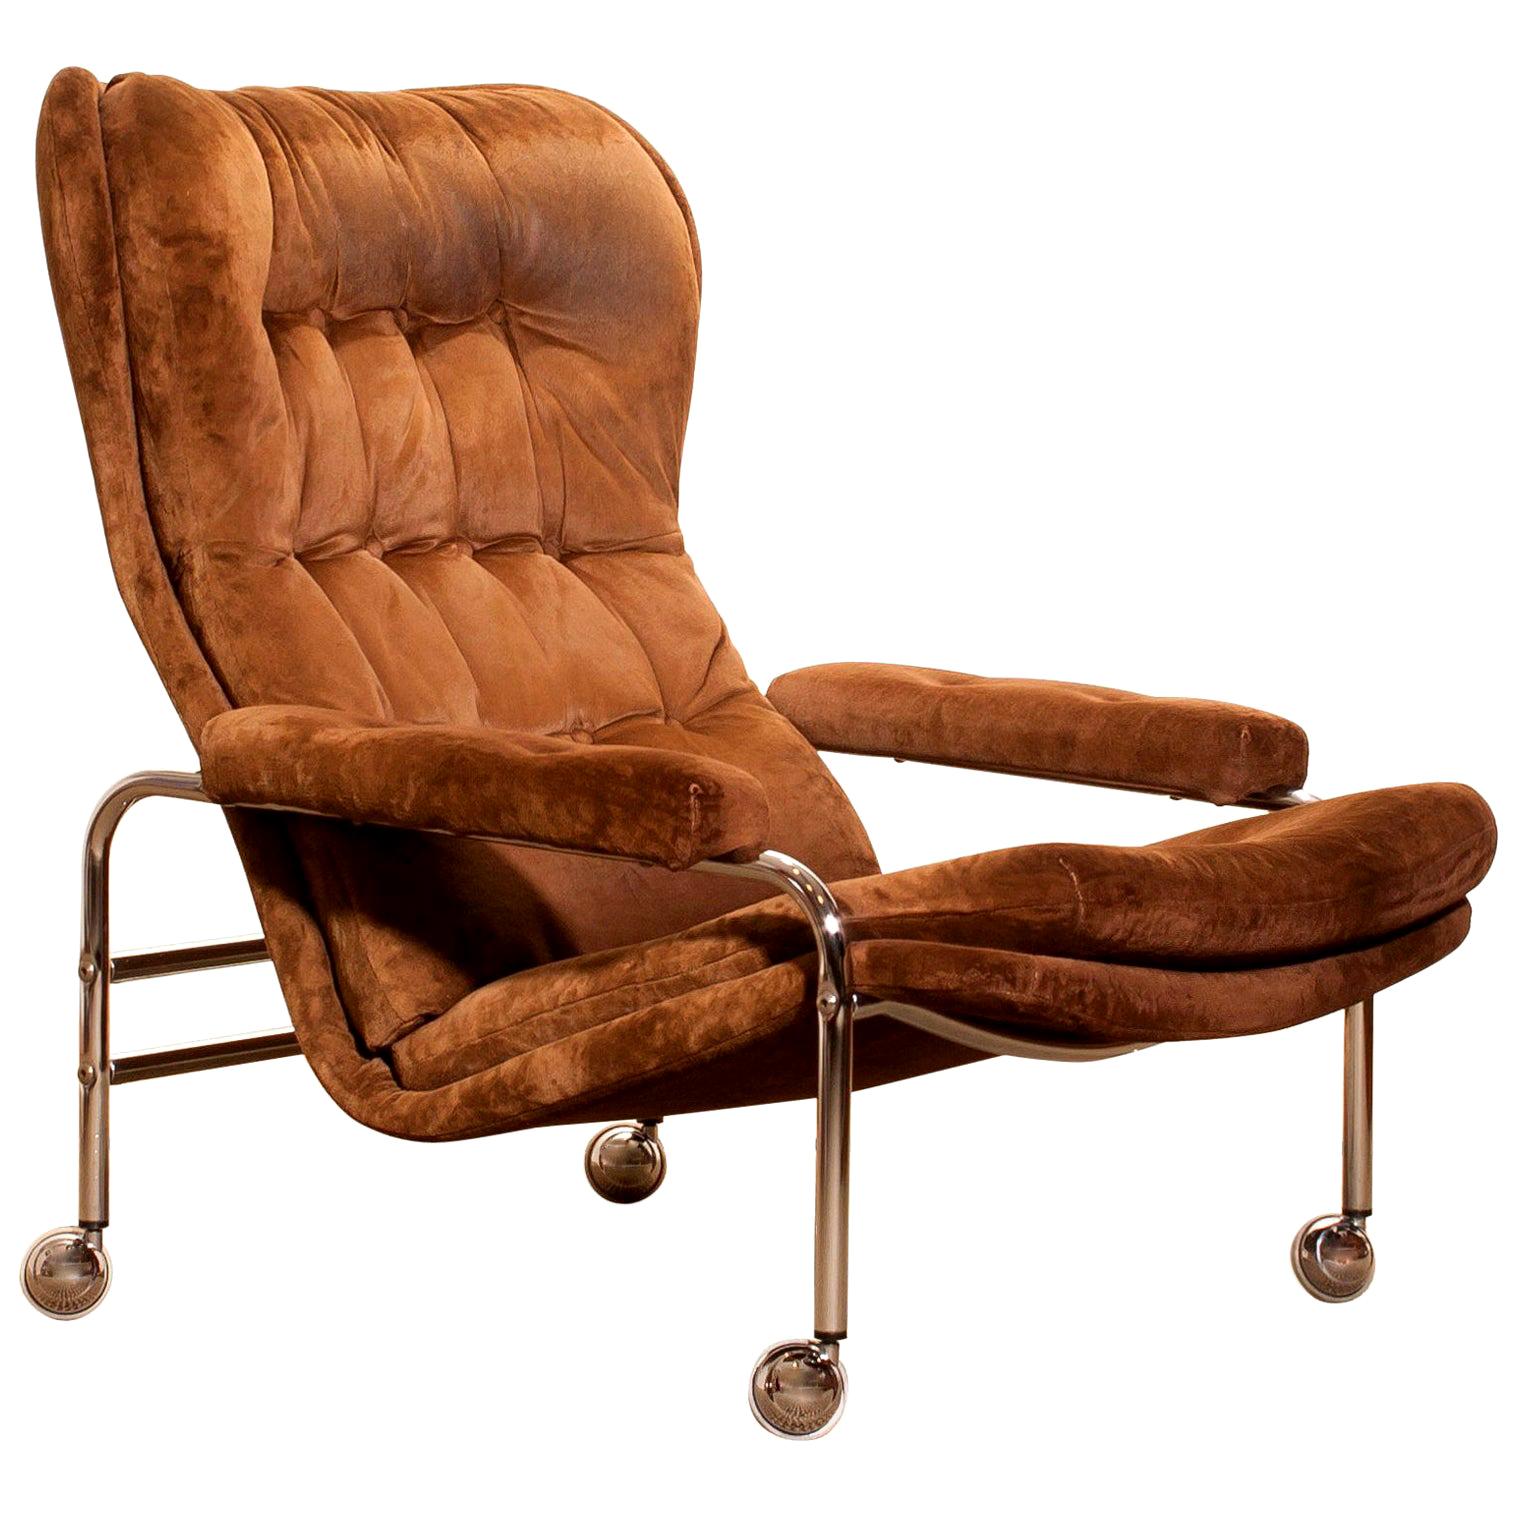 Beautiful lounge chair made by Sapa Rydaholm, Sweden.
This chair has brown velour’s seating on a chromed wheeled frame.
It is in a very nice used condition with little bald spots in the fabric.
Period: 1970s.
Dimensions: H 88 cm x W 73 cm x D